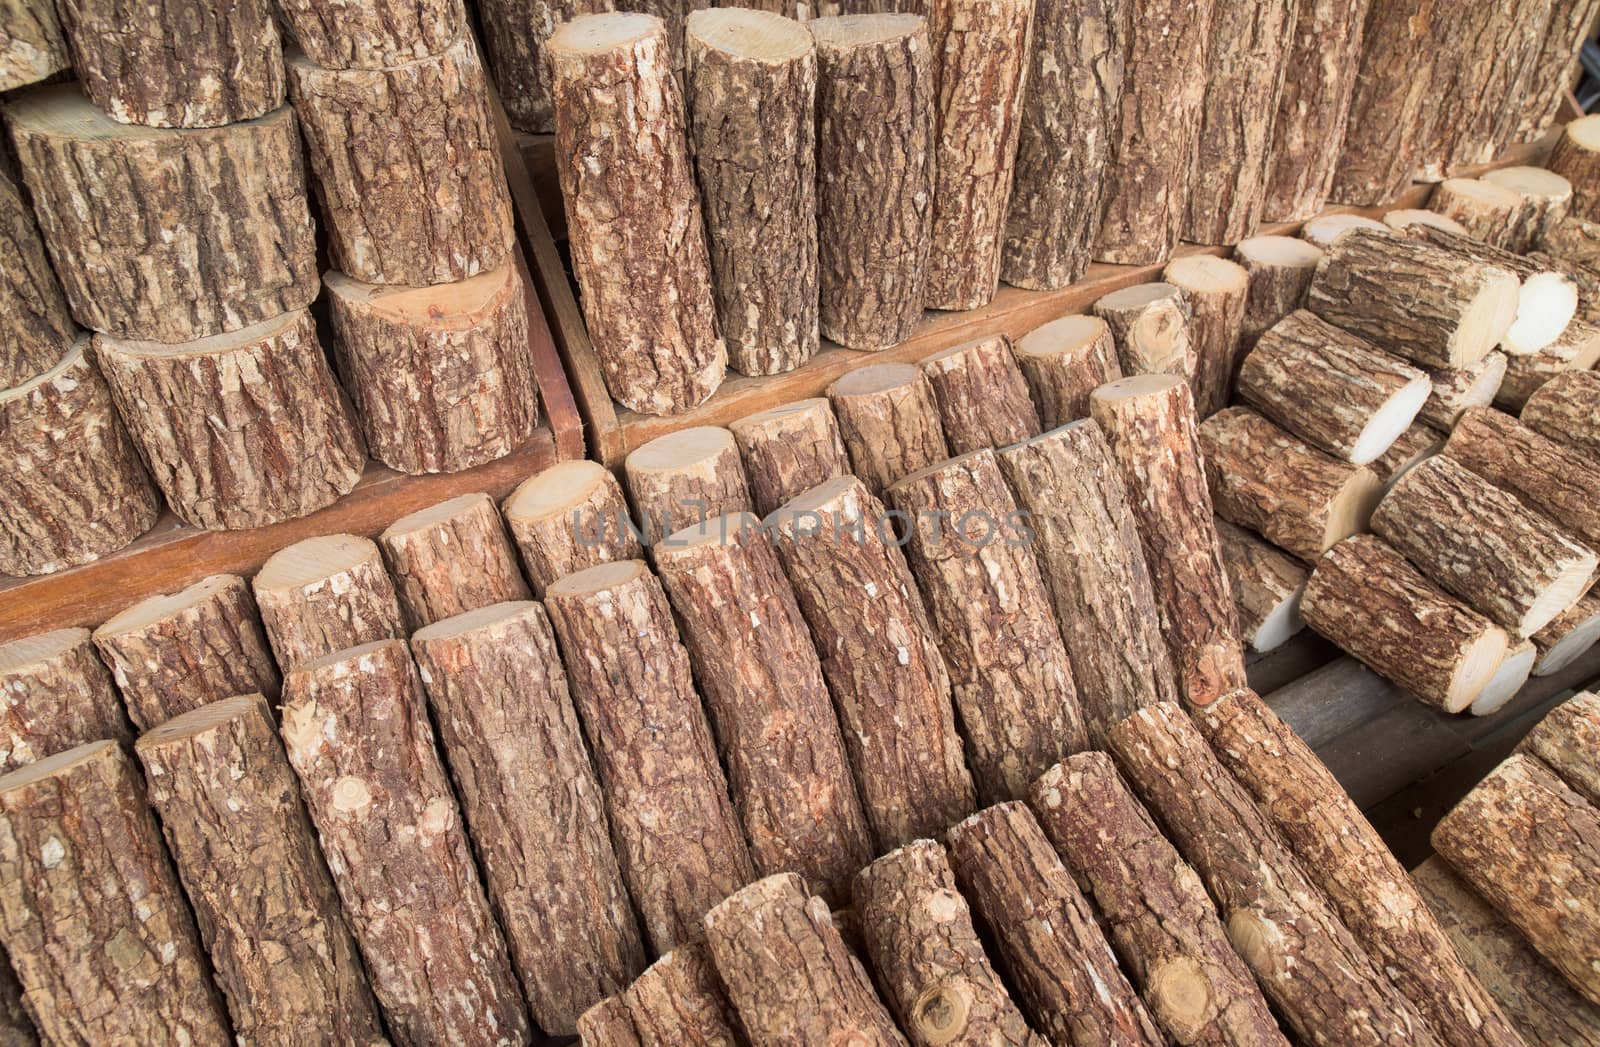 Wood for thanaka produktion at a market in Labutta Township in the Ayeyarwady Division of Myanmar. The bark of the tree is ground to make the yellow powder that is used as make-up by the burmese, mainly women.